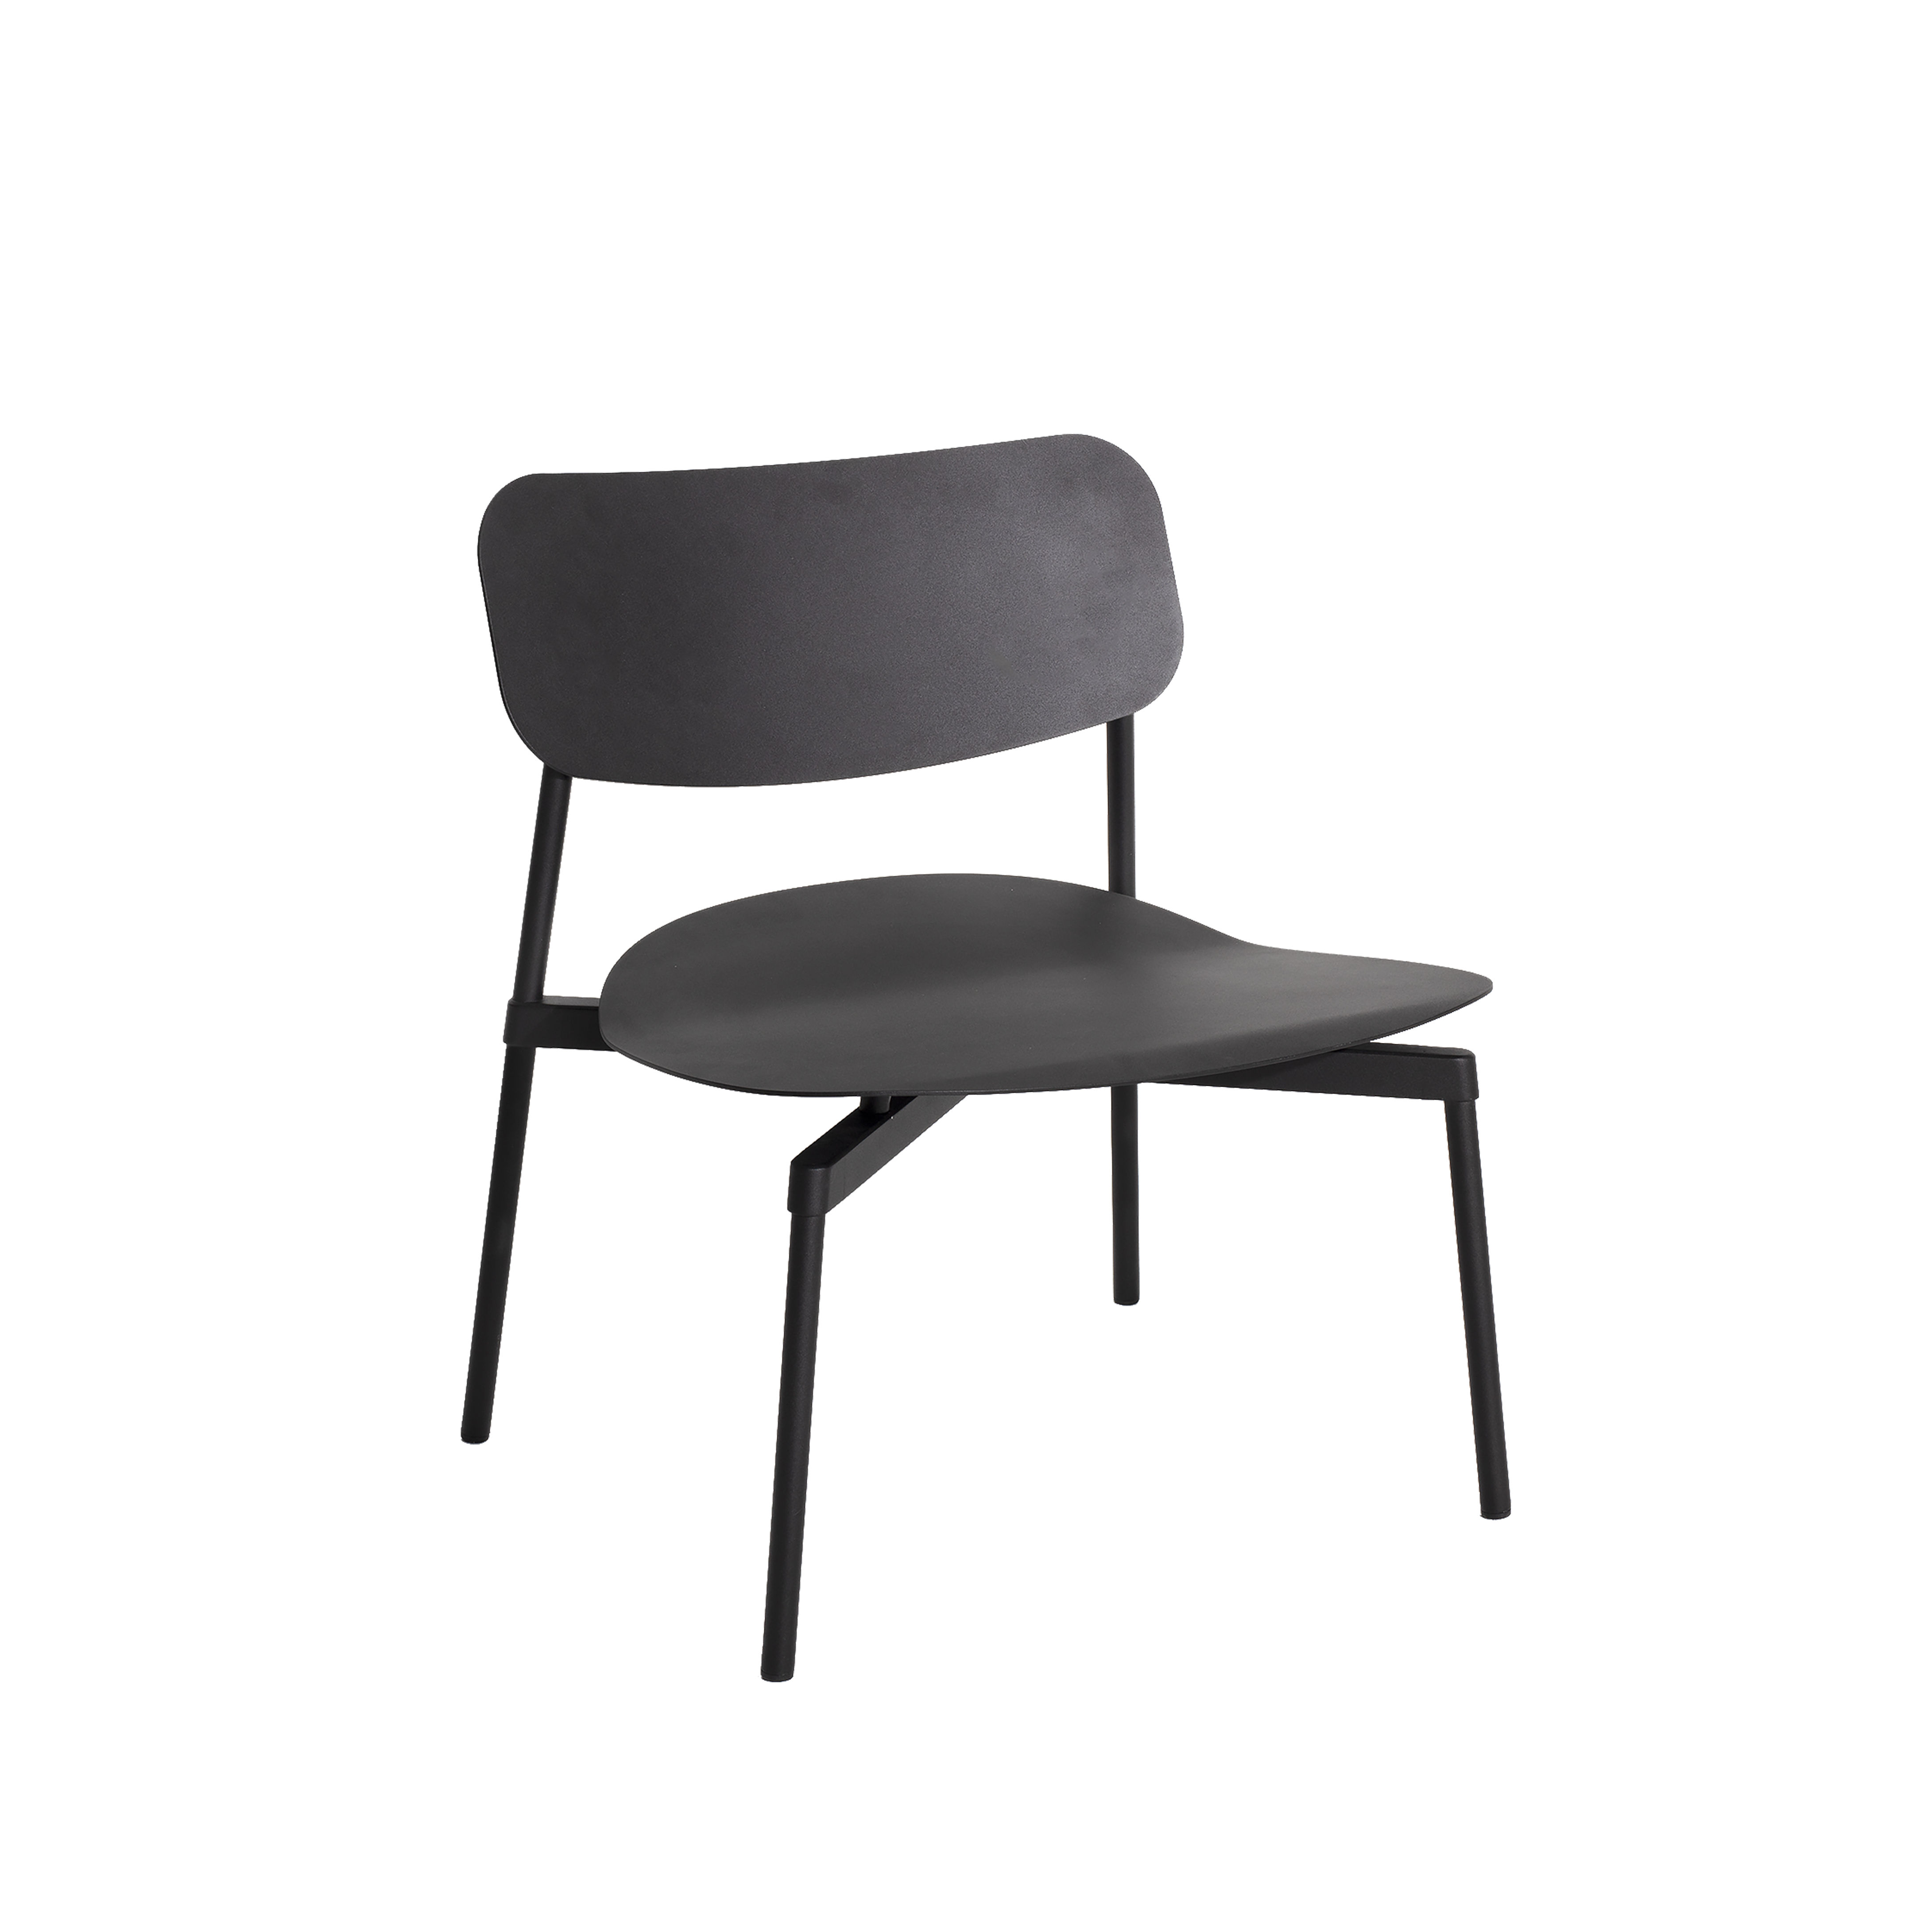 Chaise empilable Fromme Petite Friture - noir